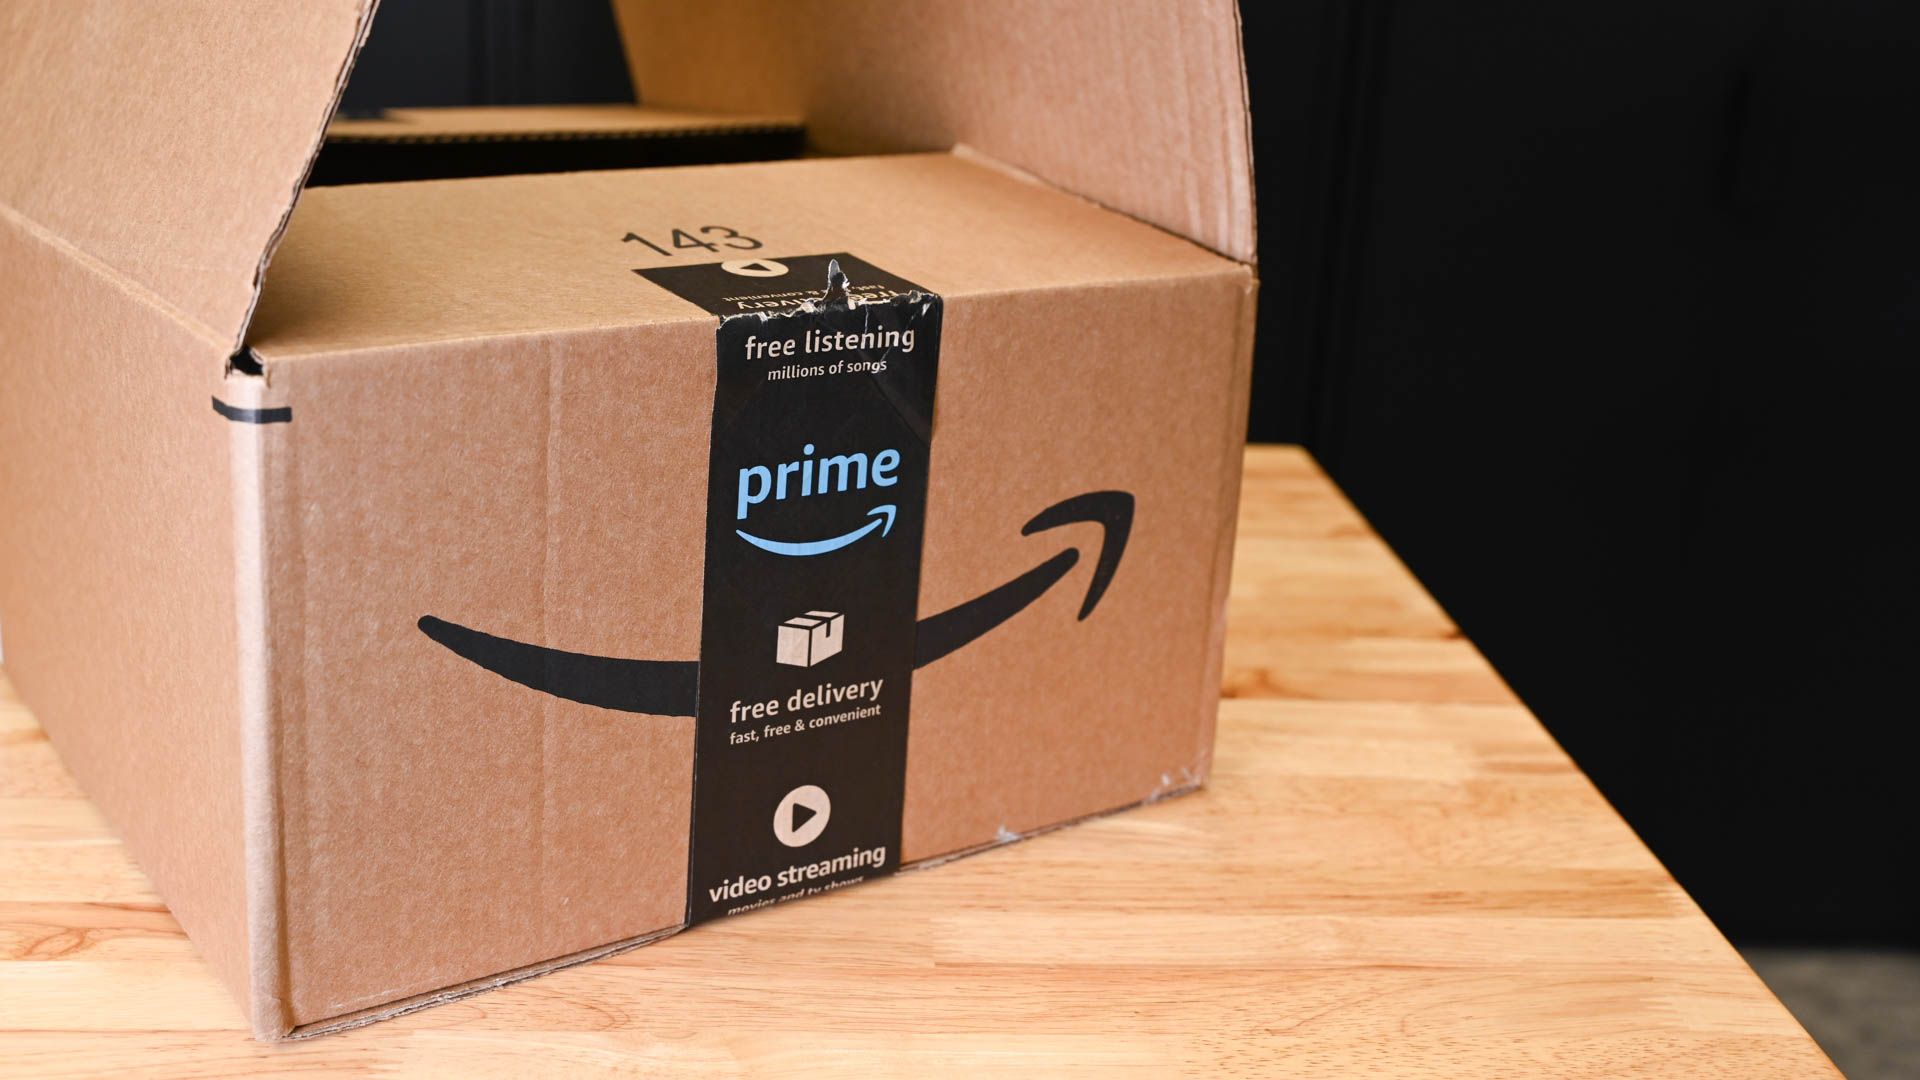 #Don’t Have Amazon Prime? You Might Have to Pay More for Shipping